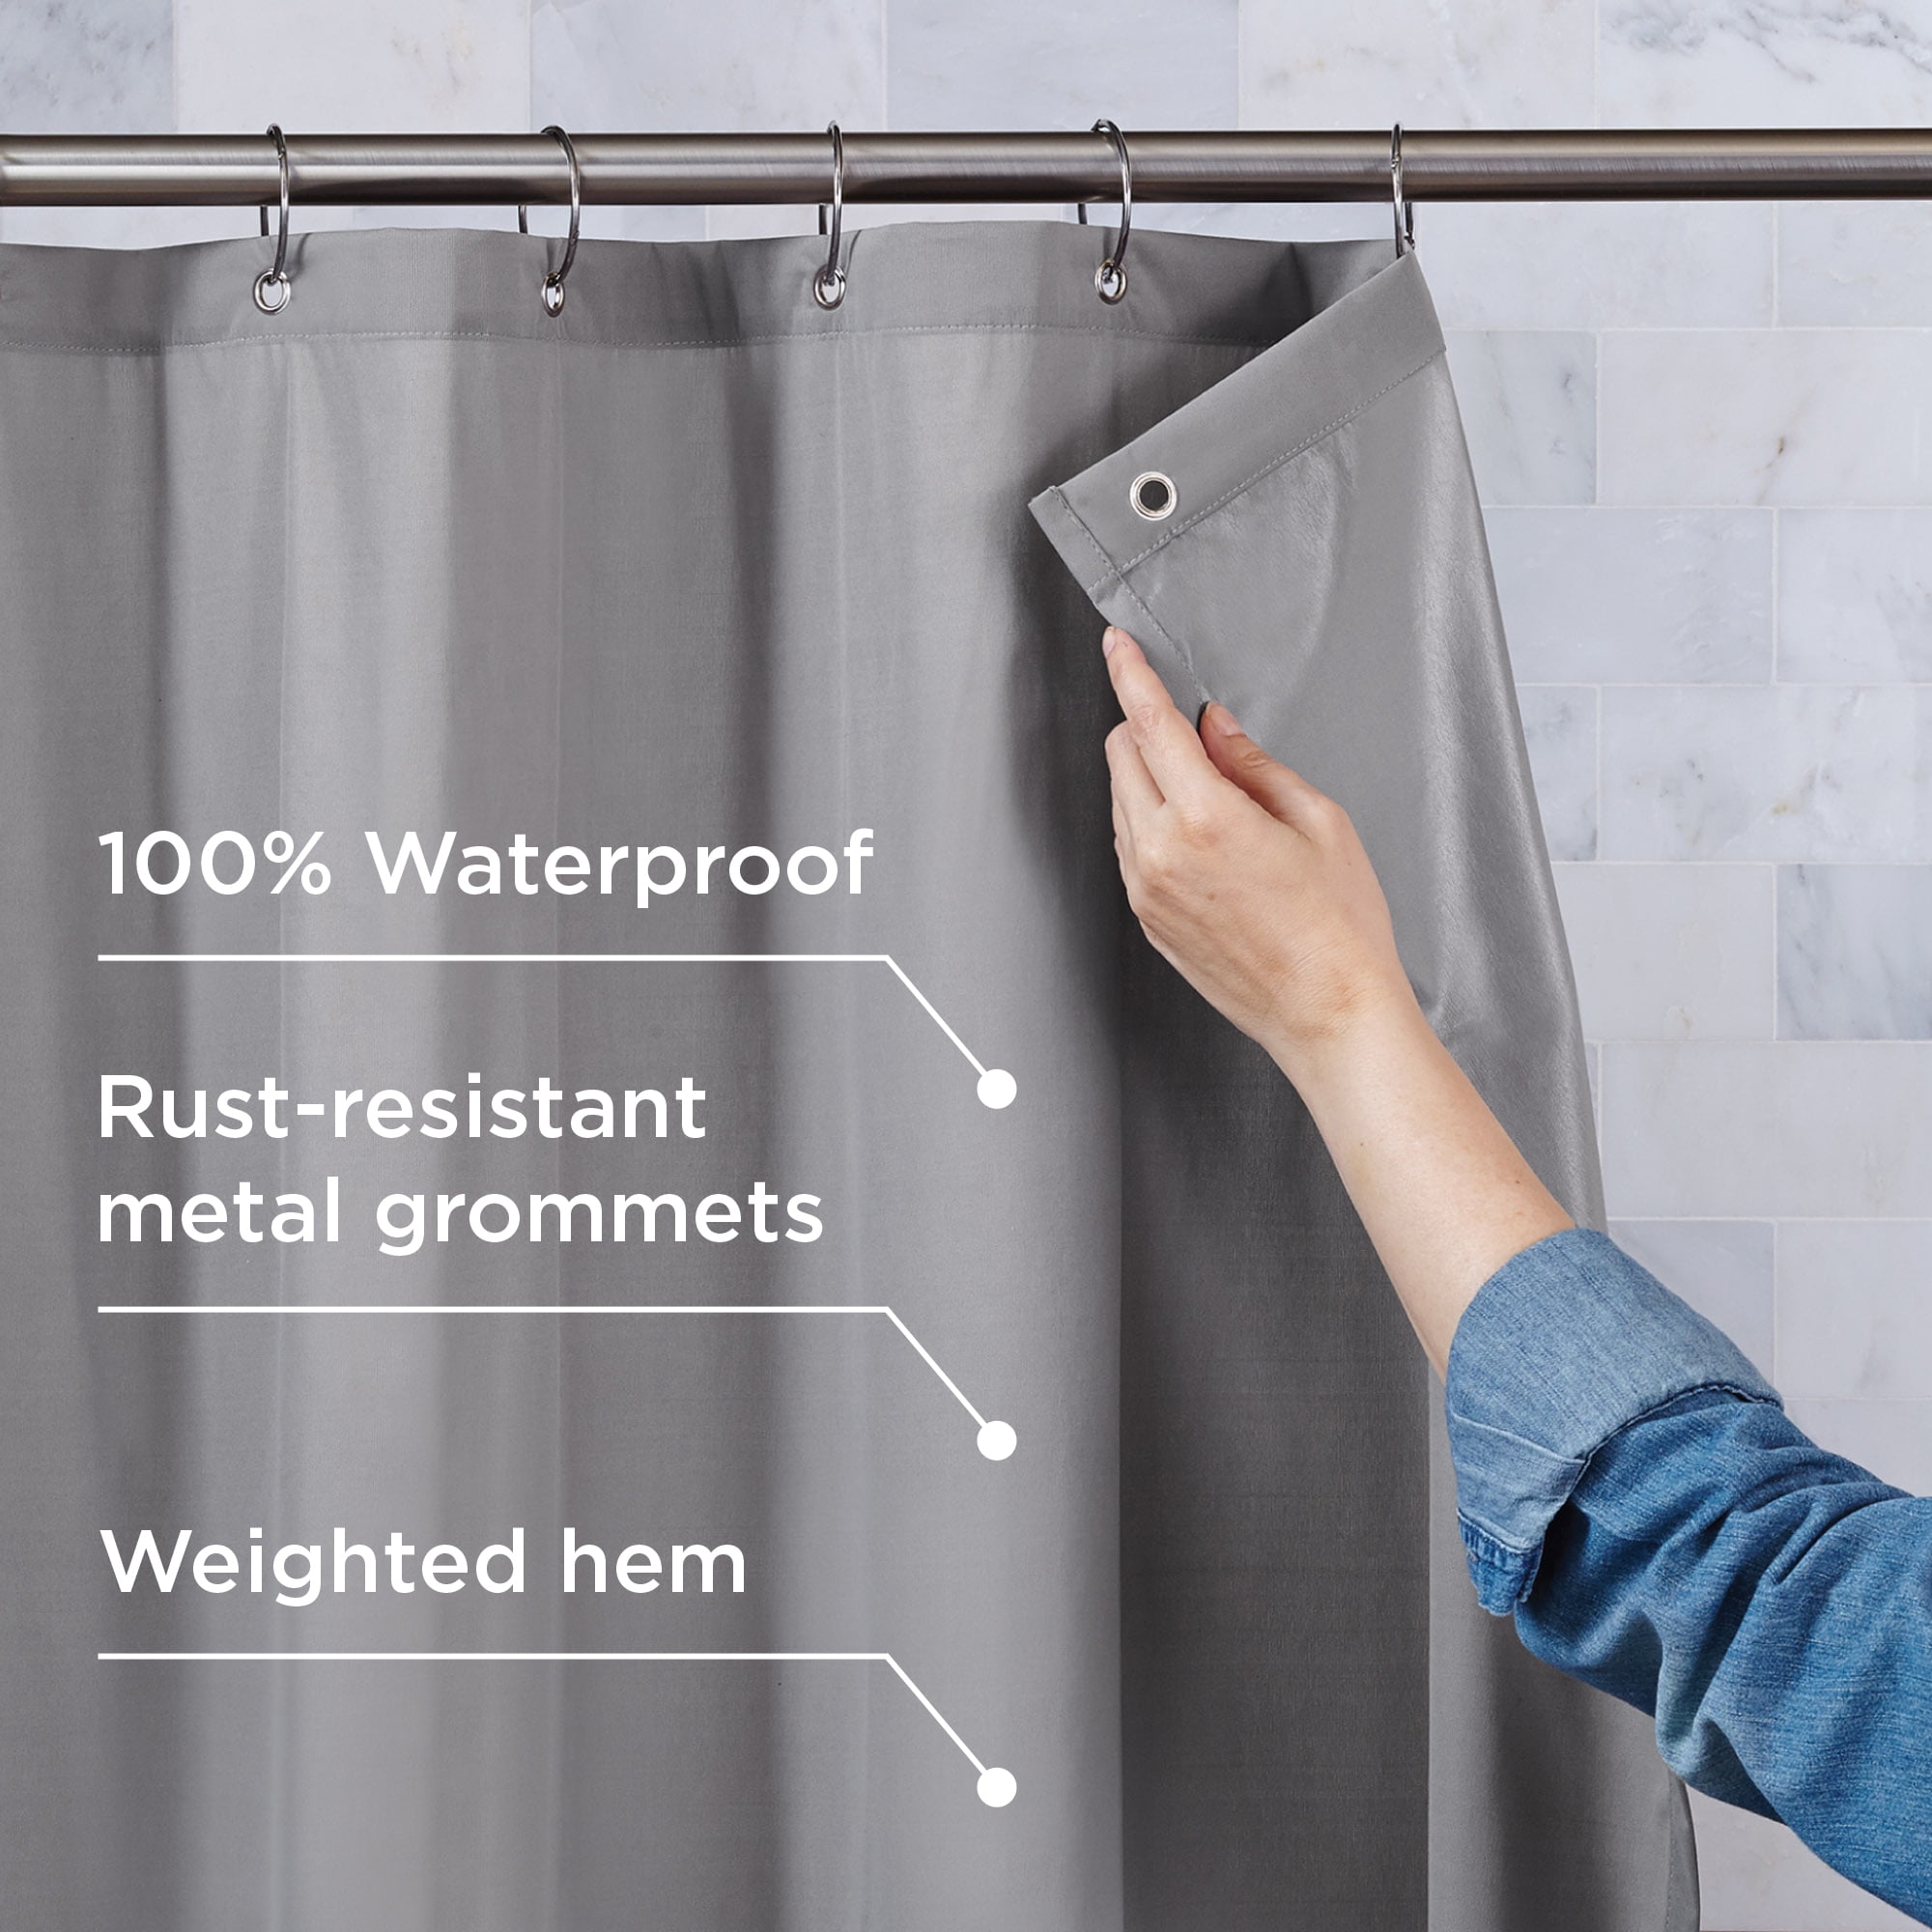 Waterproof Fabric Shower Curtain Or, Does Fabric Shower Curtains Need Liner